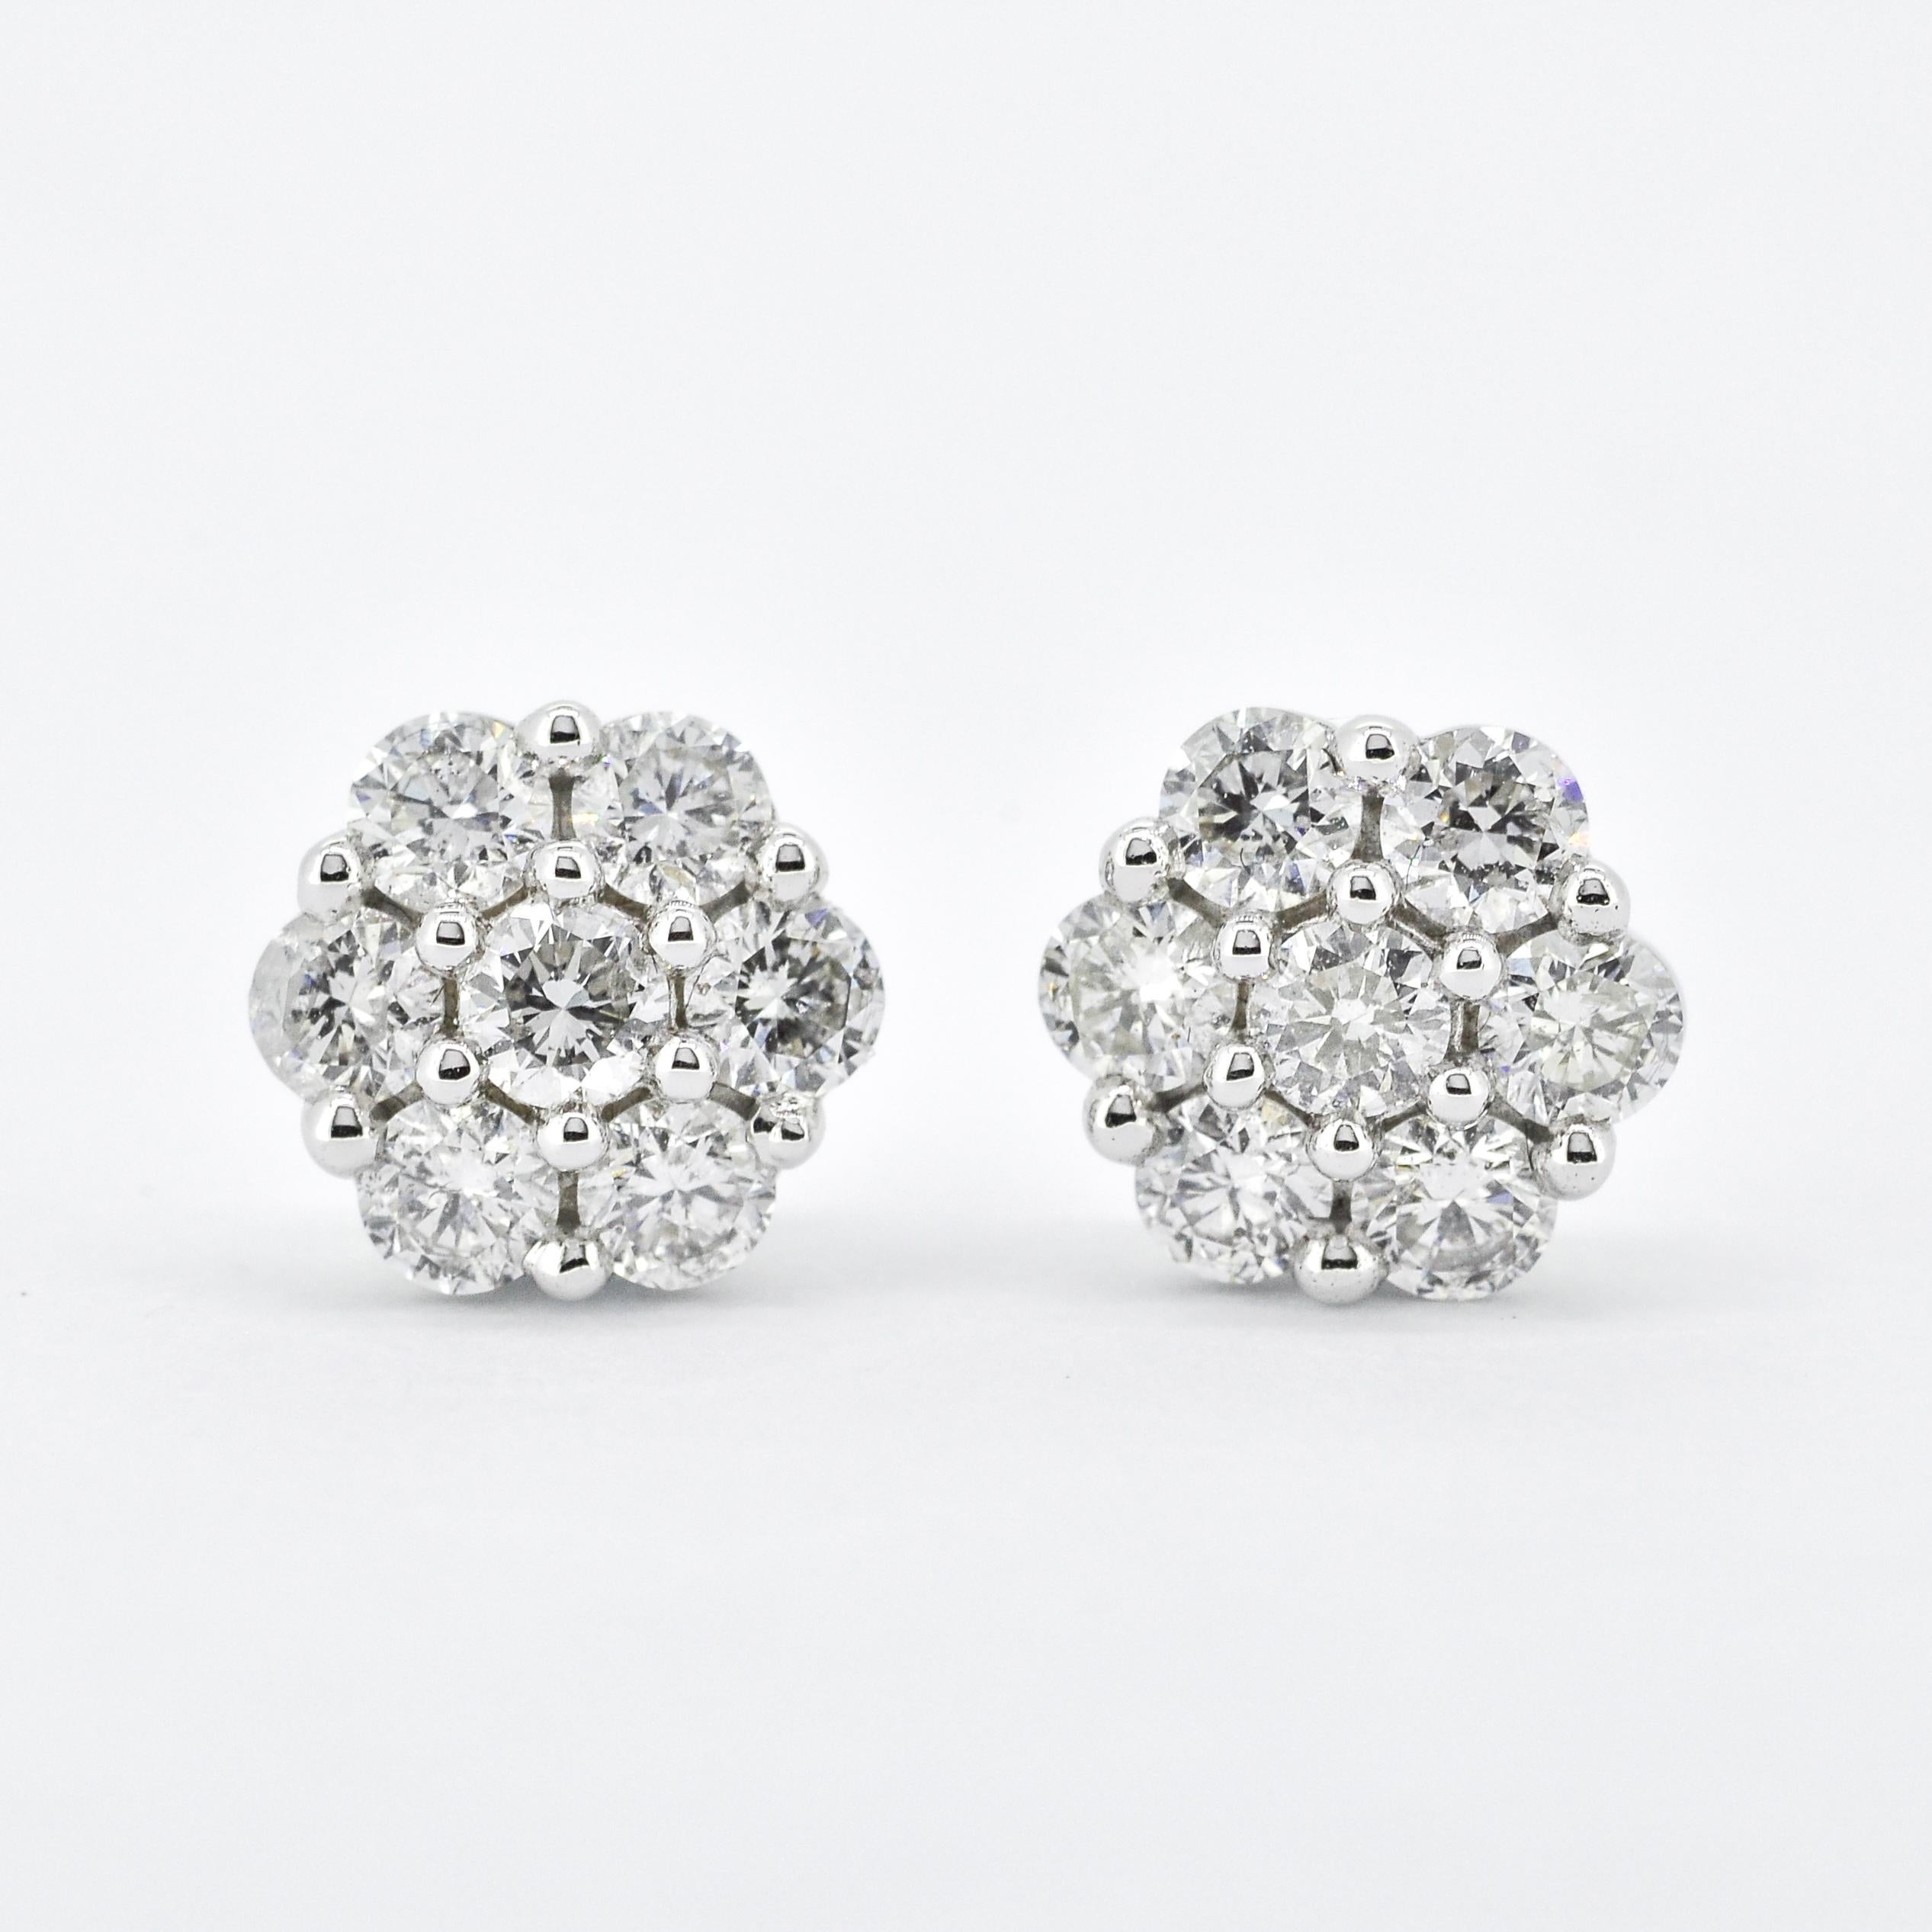 Introducing our exquisite 18kt white Gold ethically sourced natural diamond cluster stud earrings. These earrings offer a timeless and classic look that effortlessly transitions from daytime to nighttime, ensuring elegance at every moment.

Crafted